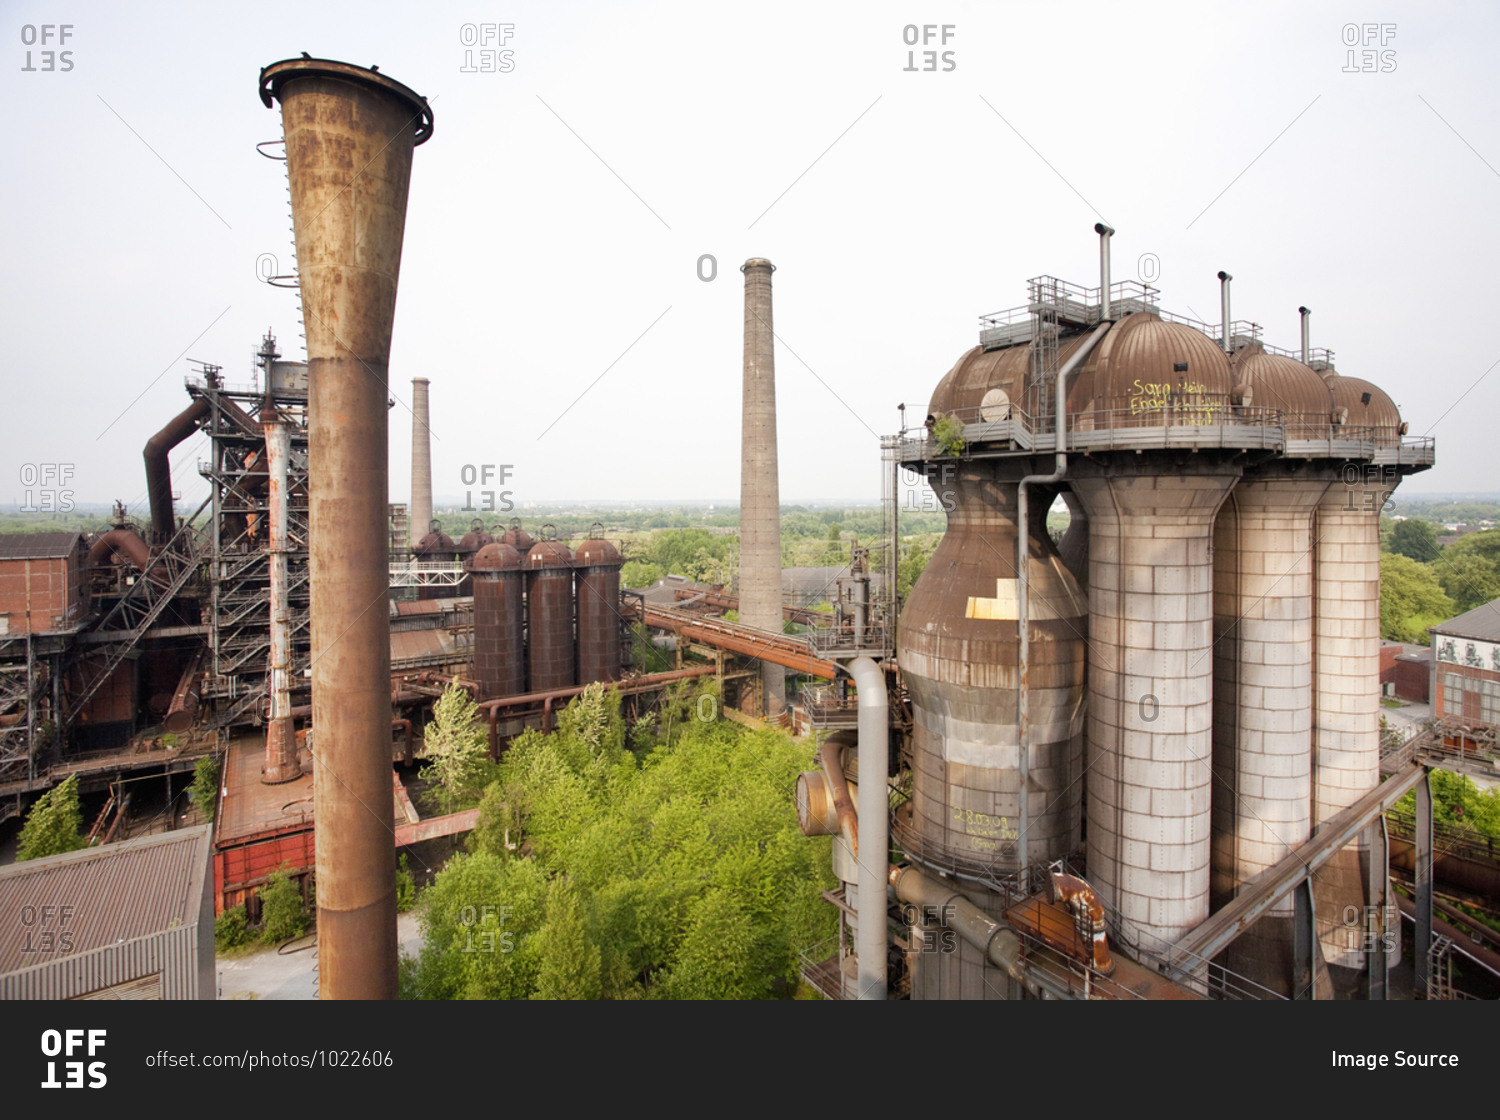 Coal And Steel Plant, North-Duisburg Park, Ruhr Region, Germany